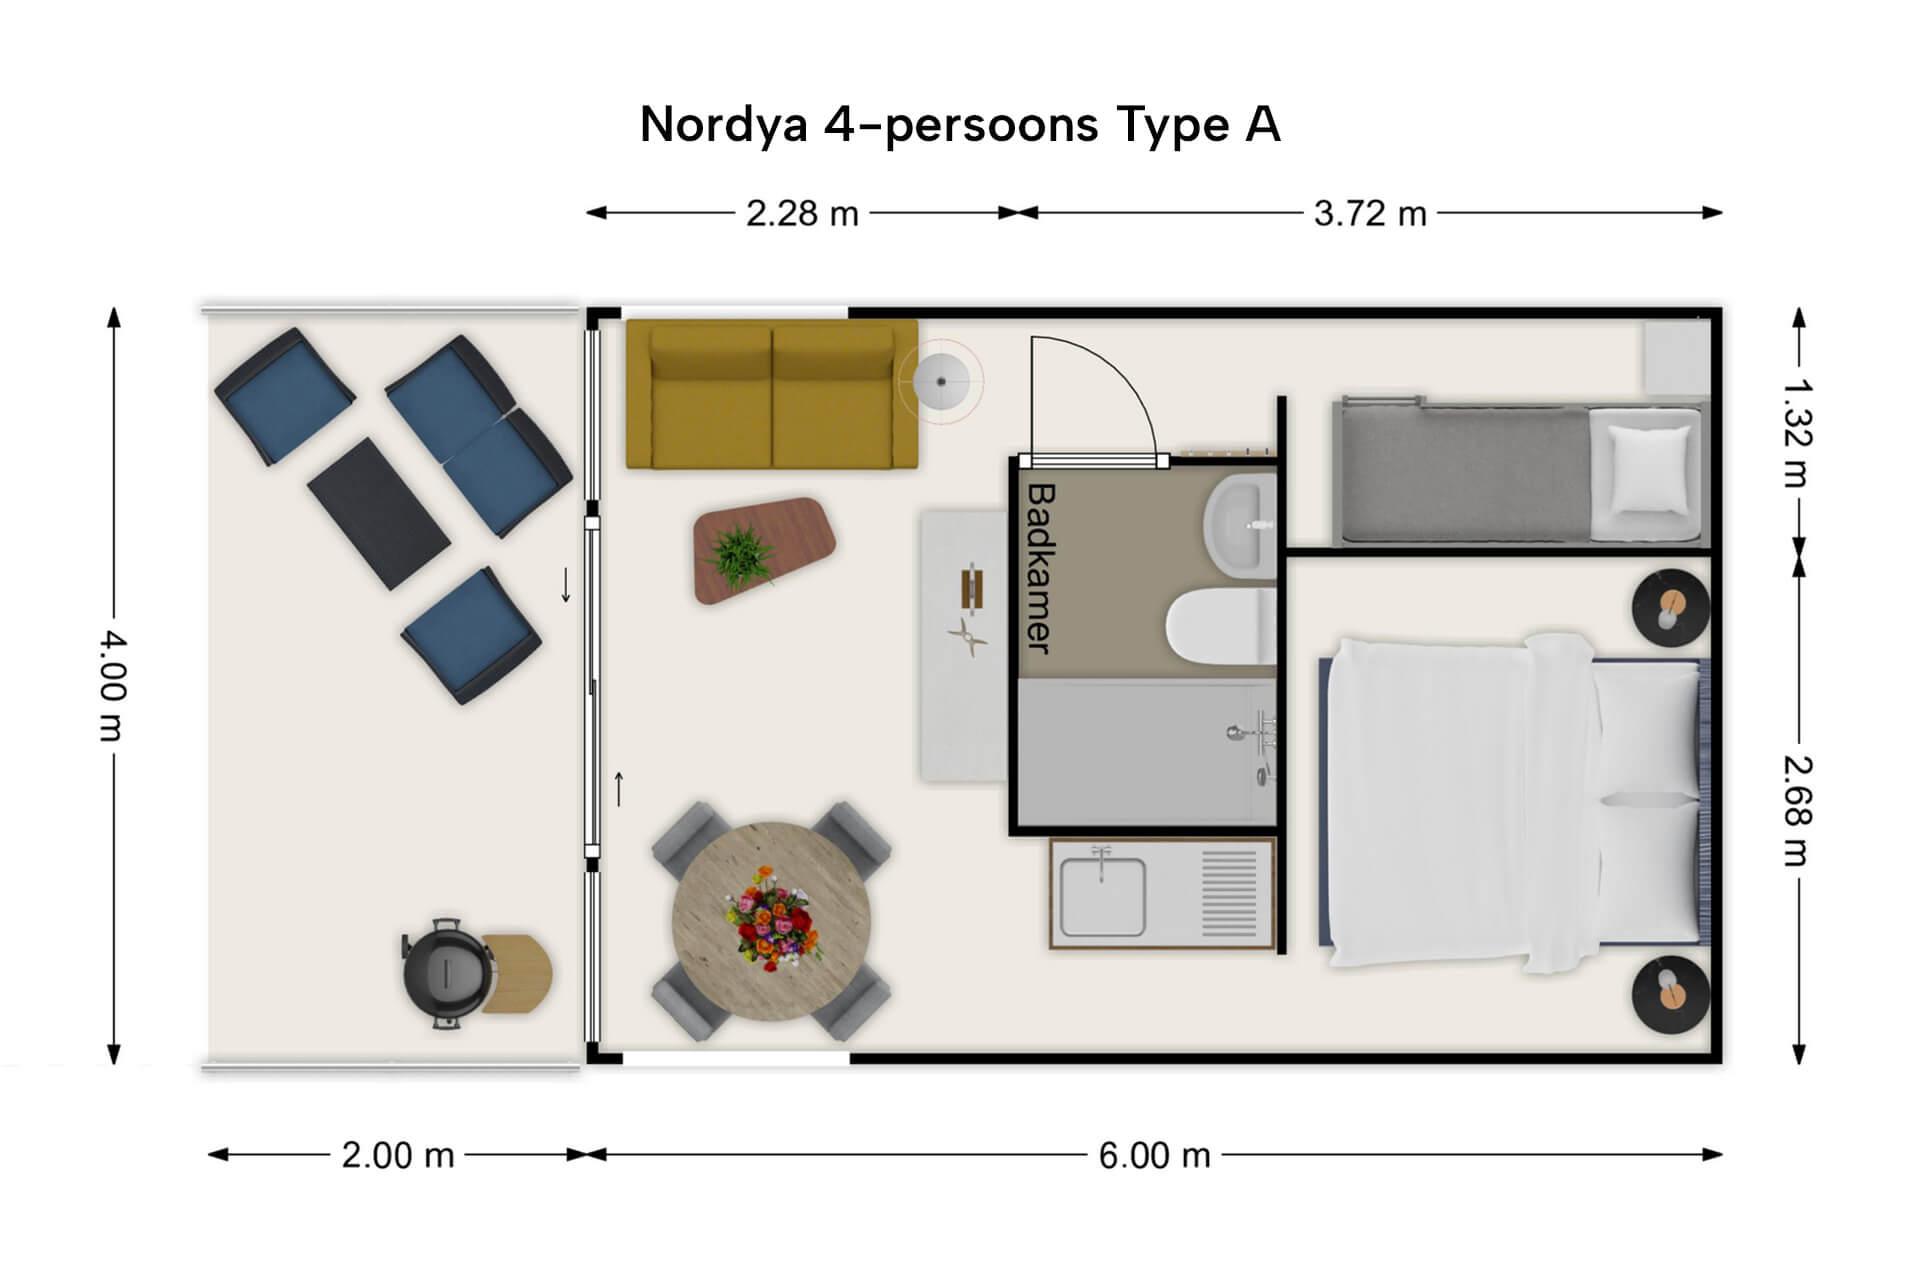 Nordya 4-persoons Type-A